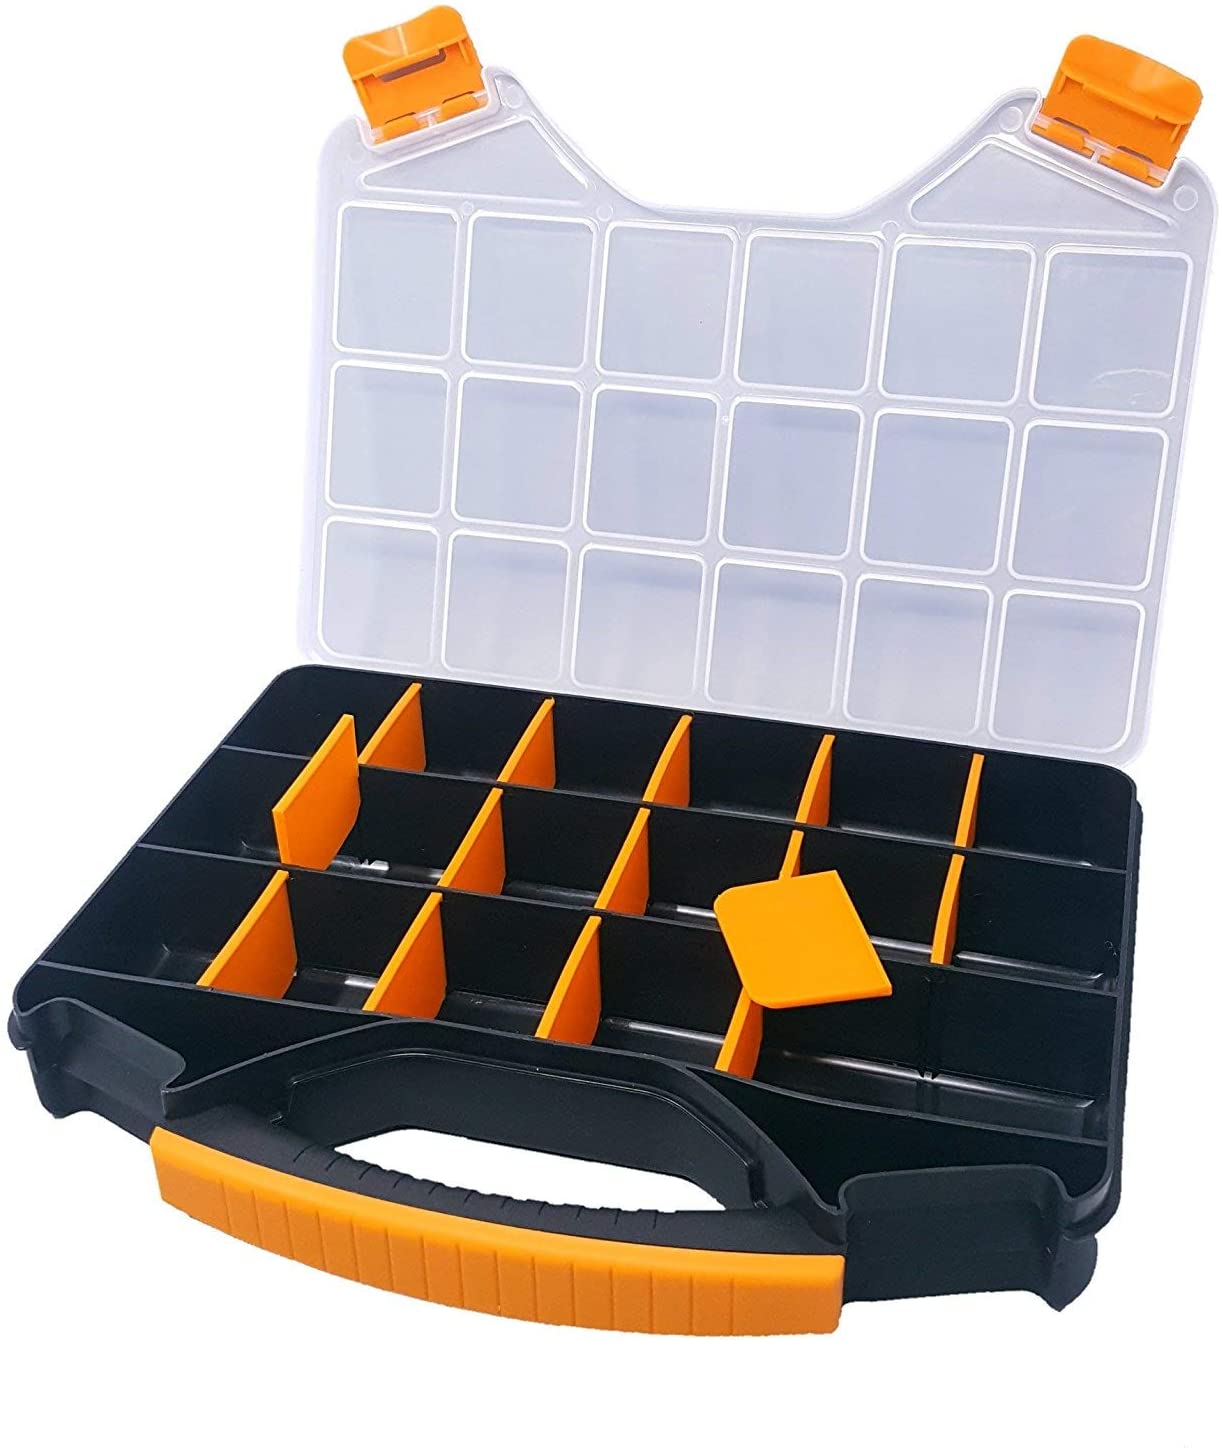 Tactix 320028 Double Sided Parts Organizer